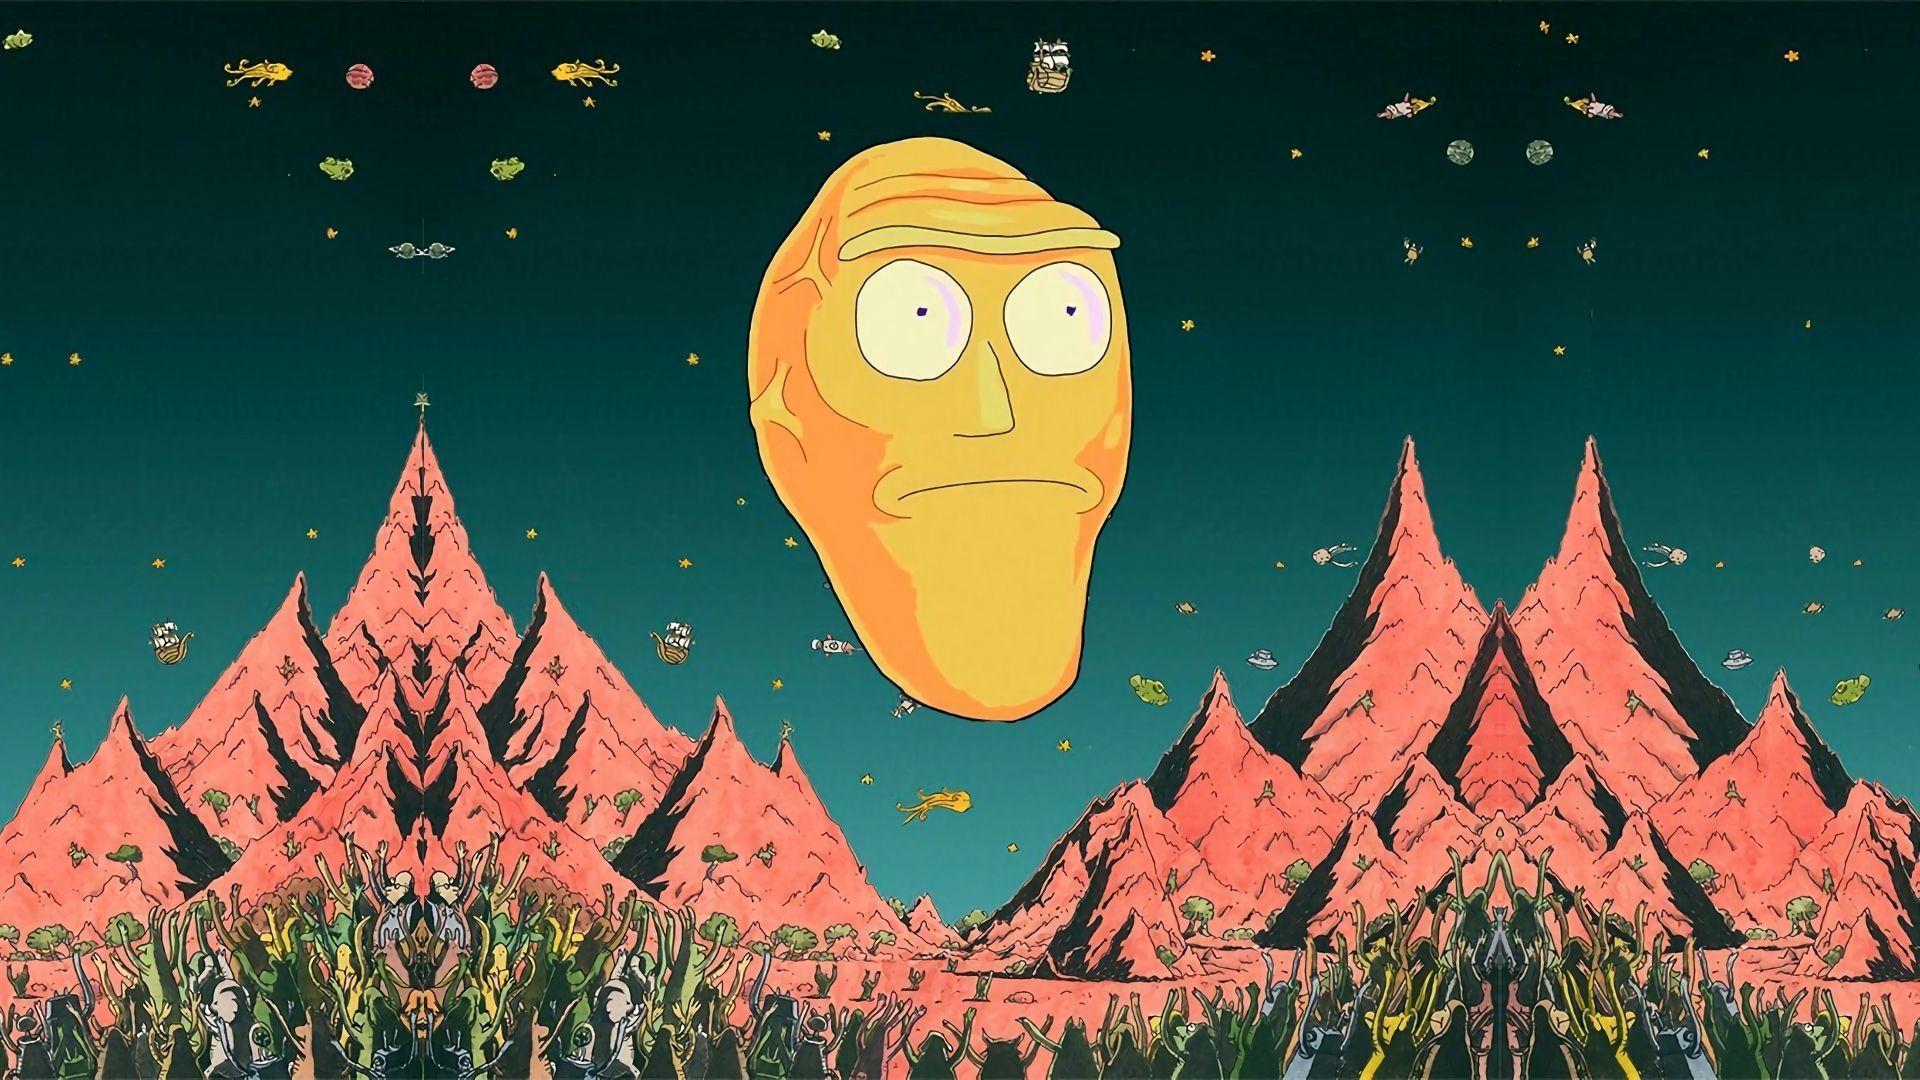 Rick And Morty Wallpaper Giant Heads. Rick, morty